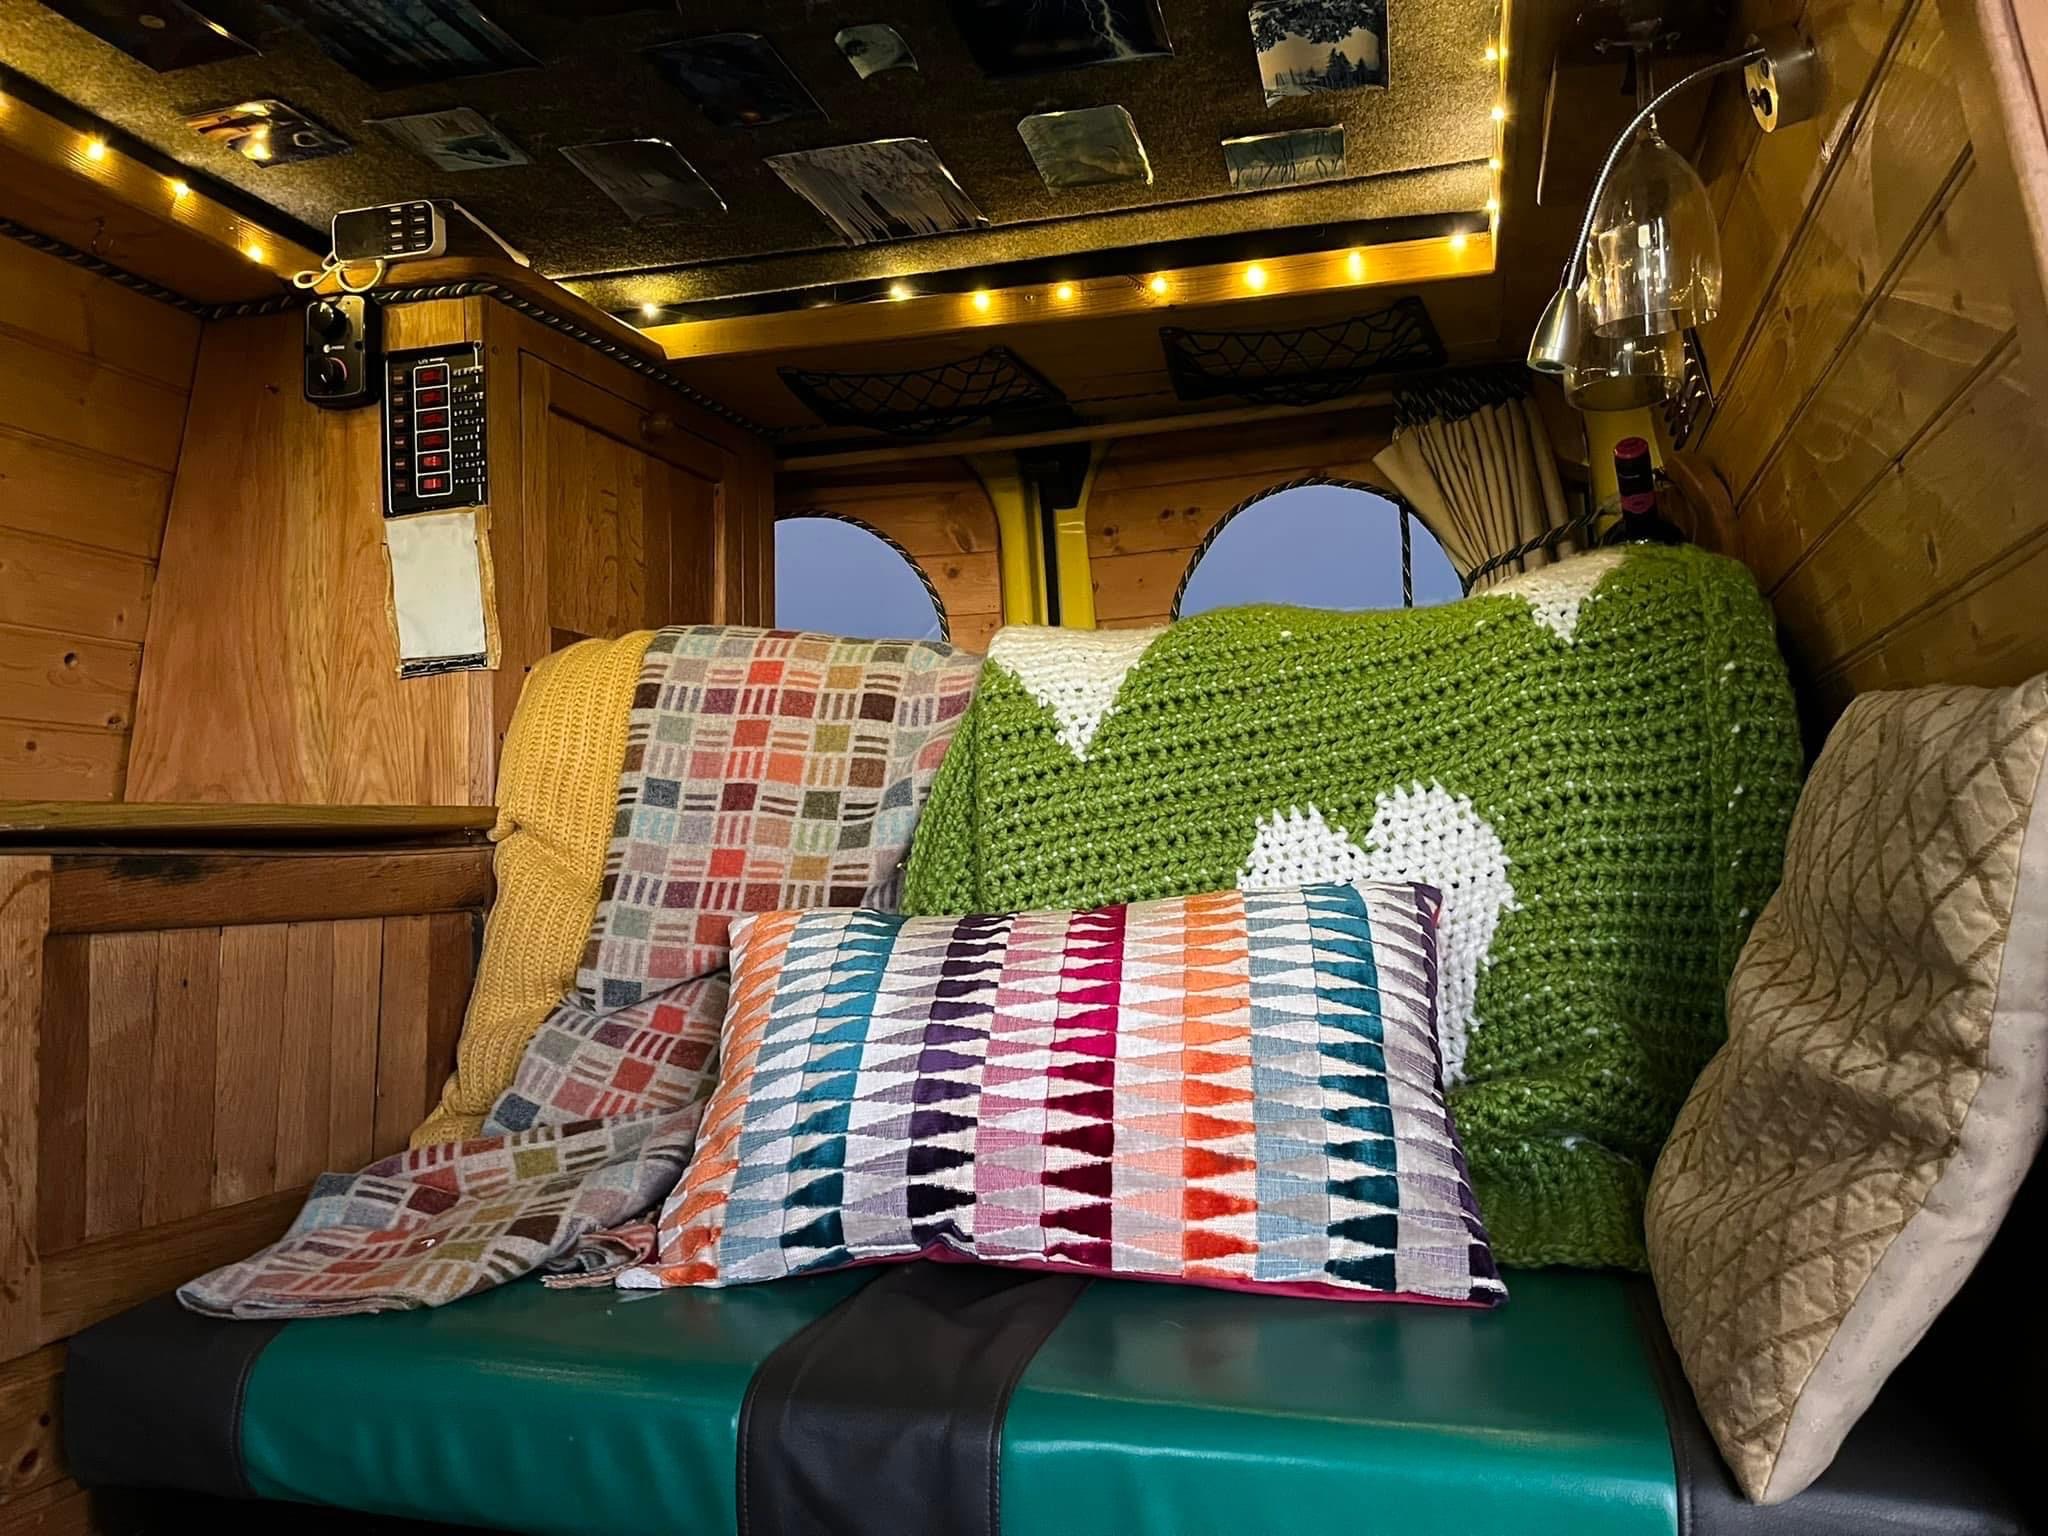 The image shows the cozy interior of a camper van. The seating area features a blue-green cushioned bench, draped with a green crochet blanket and a yellow quilt. A colorful geometric-patterned pillow rests on the bench. The wooden walls and soft lighting create a warm, inviting atmosphere.